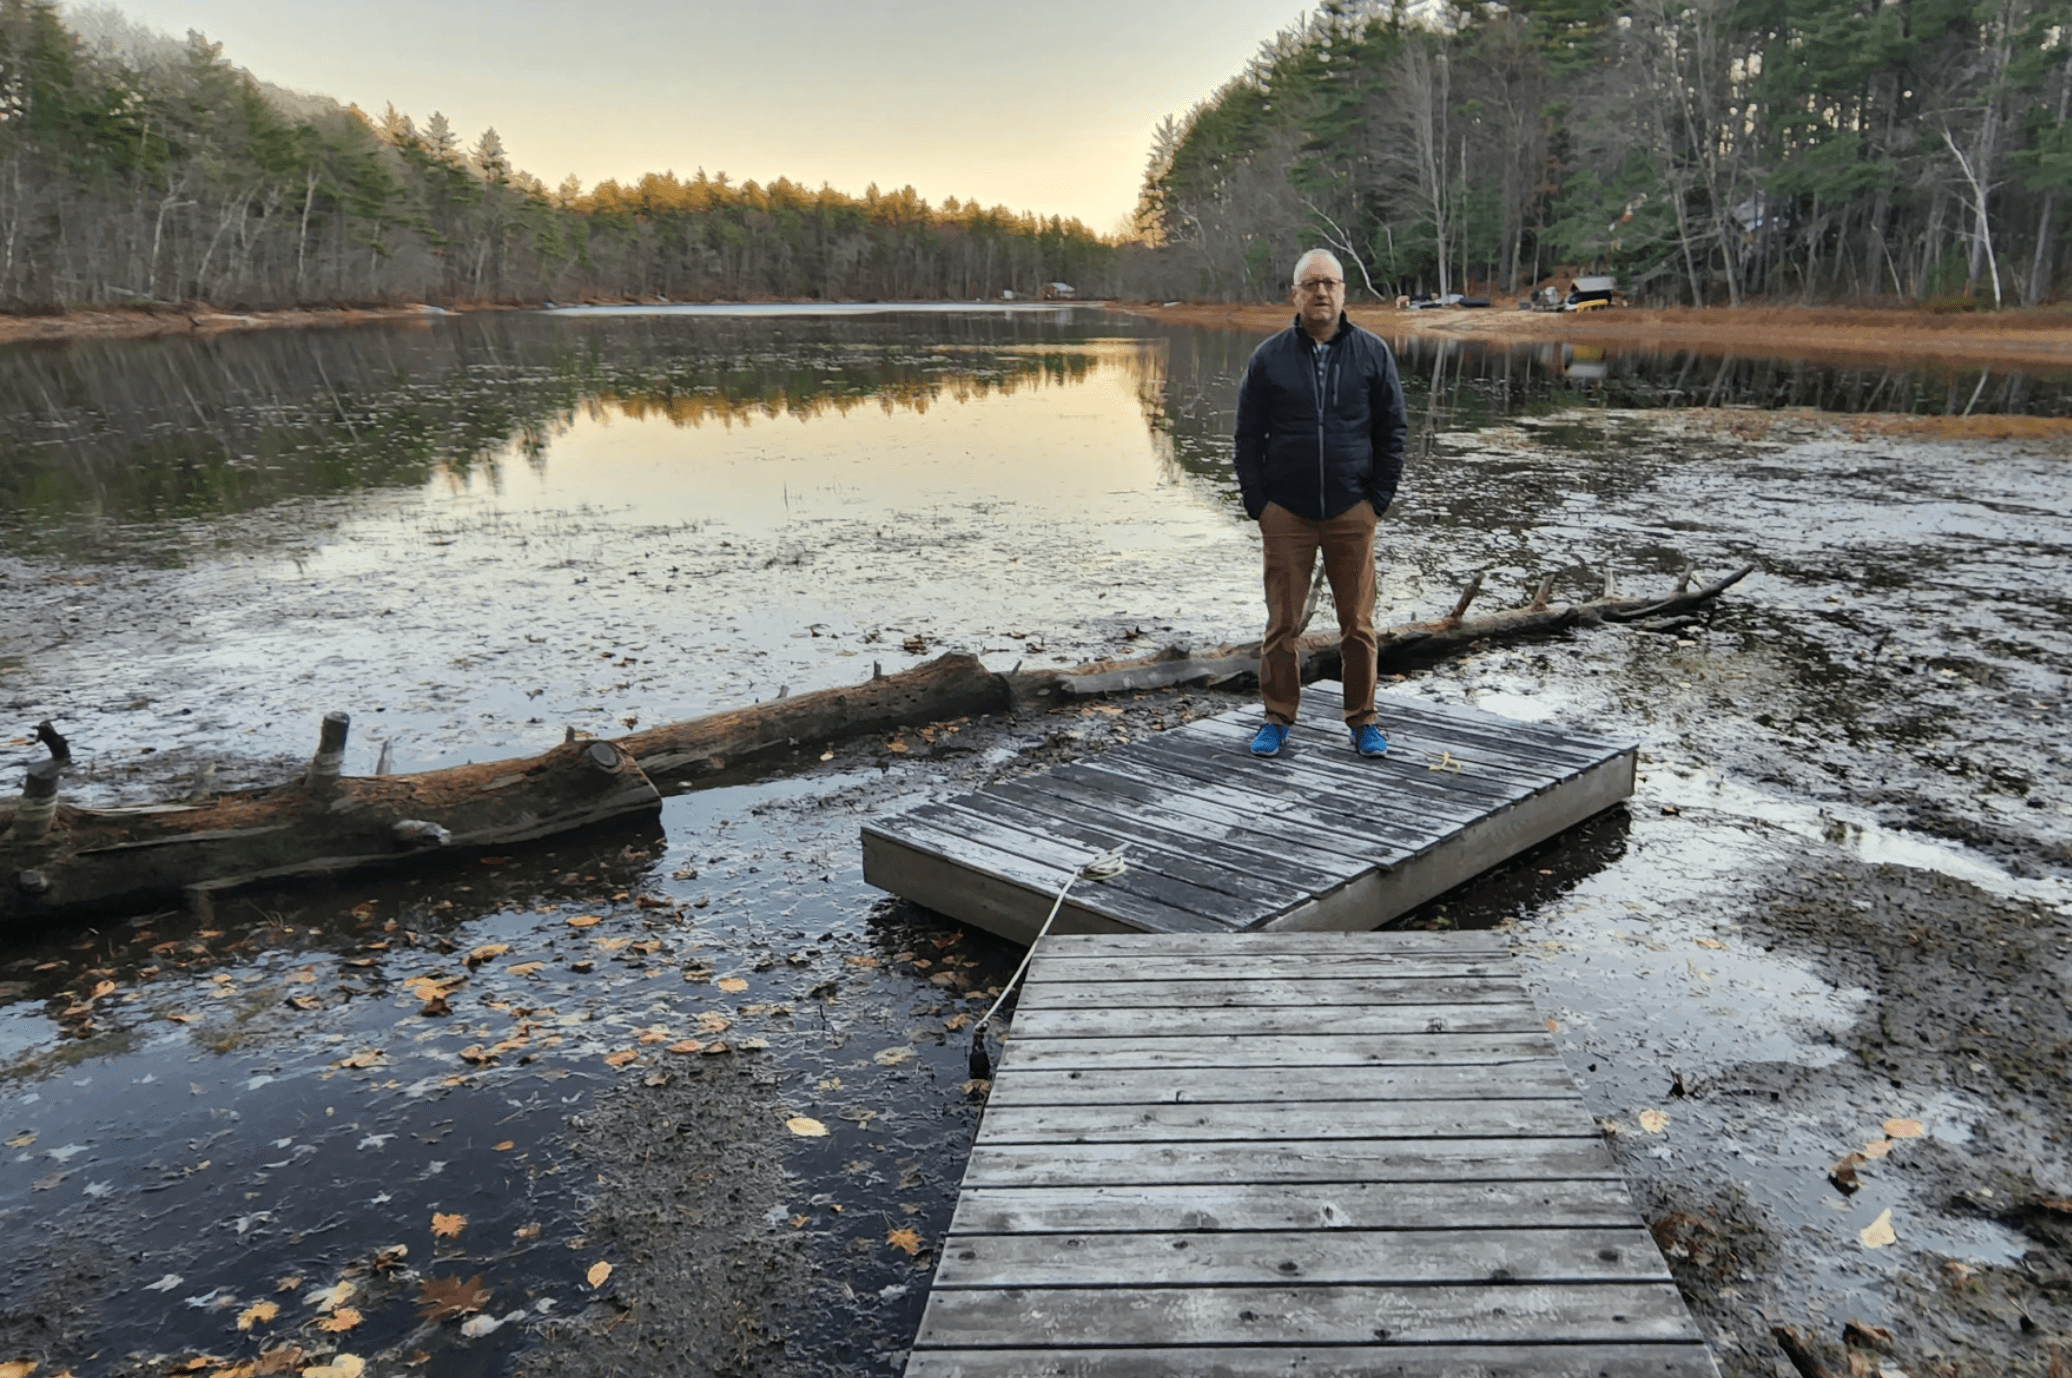 Jim Metivier stands on extensions of his dock over Long Pond in Denmark, Maine, in Nov. 2022. Water levels on his property have gradually receded over a period of several years. &quot;I haven't been able to get my canoe out since July,&quot; Metivier said. (Susan Sharon/Maine Public)